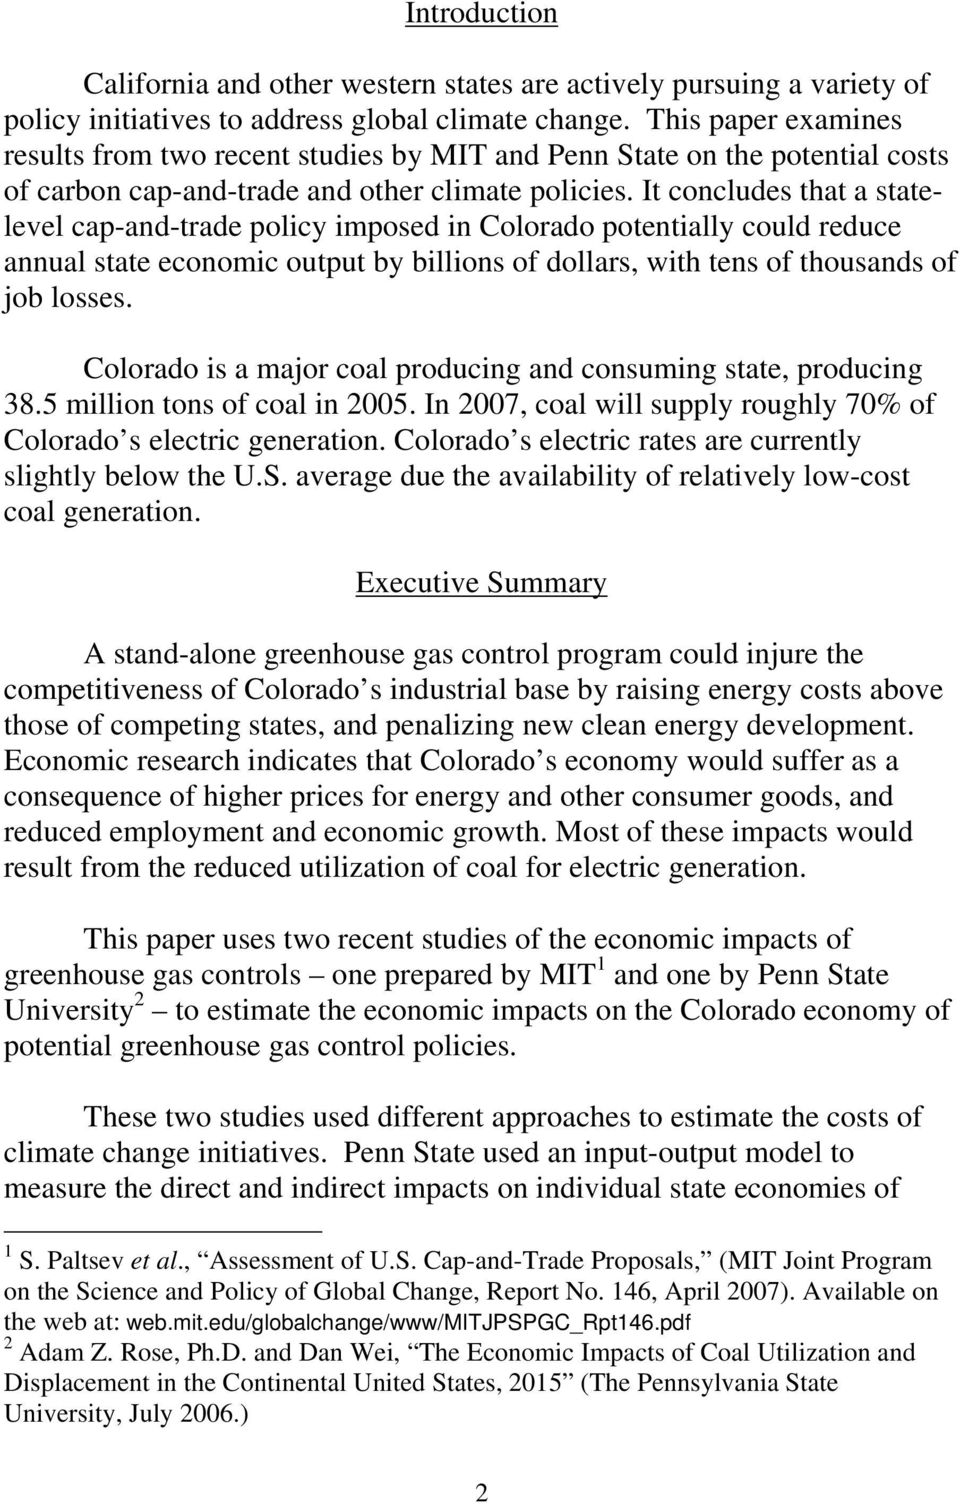 It concludes that a statelevel cap-and-trade policy imposed in Colorado potentially could reduce annual state economic output by billions of dollars, with tens of thousands of job losses.